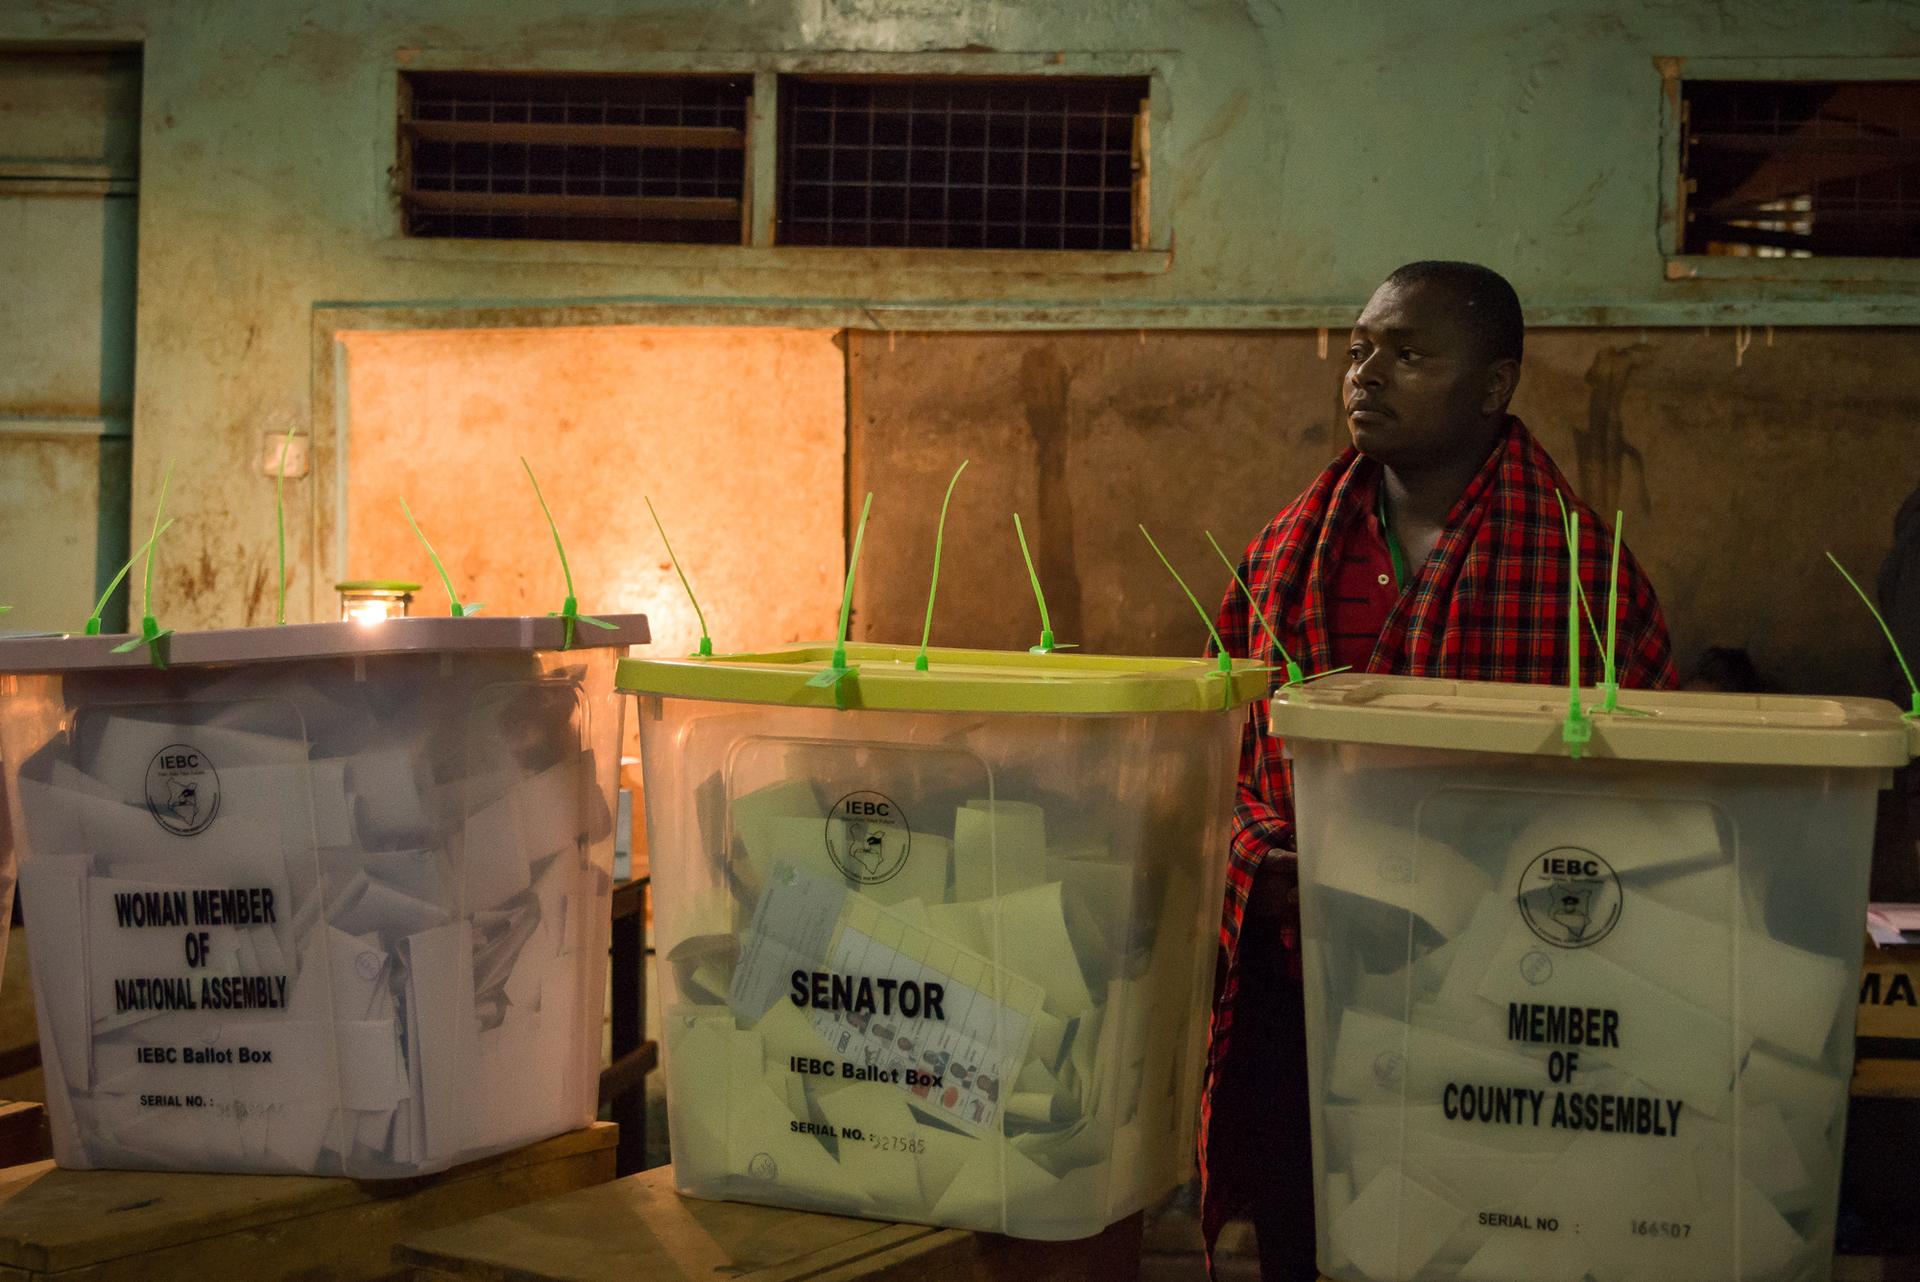 An election official wait for confirmation to begin counting votes for Kenya’s next president in Nairobi, Kenya.